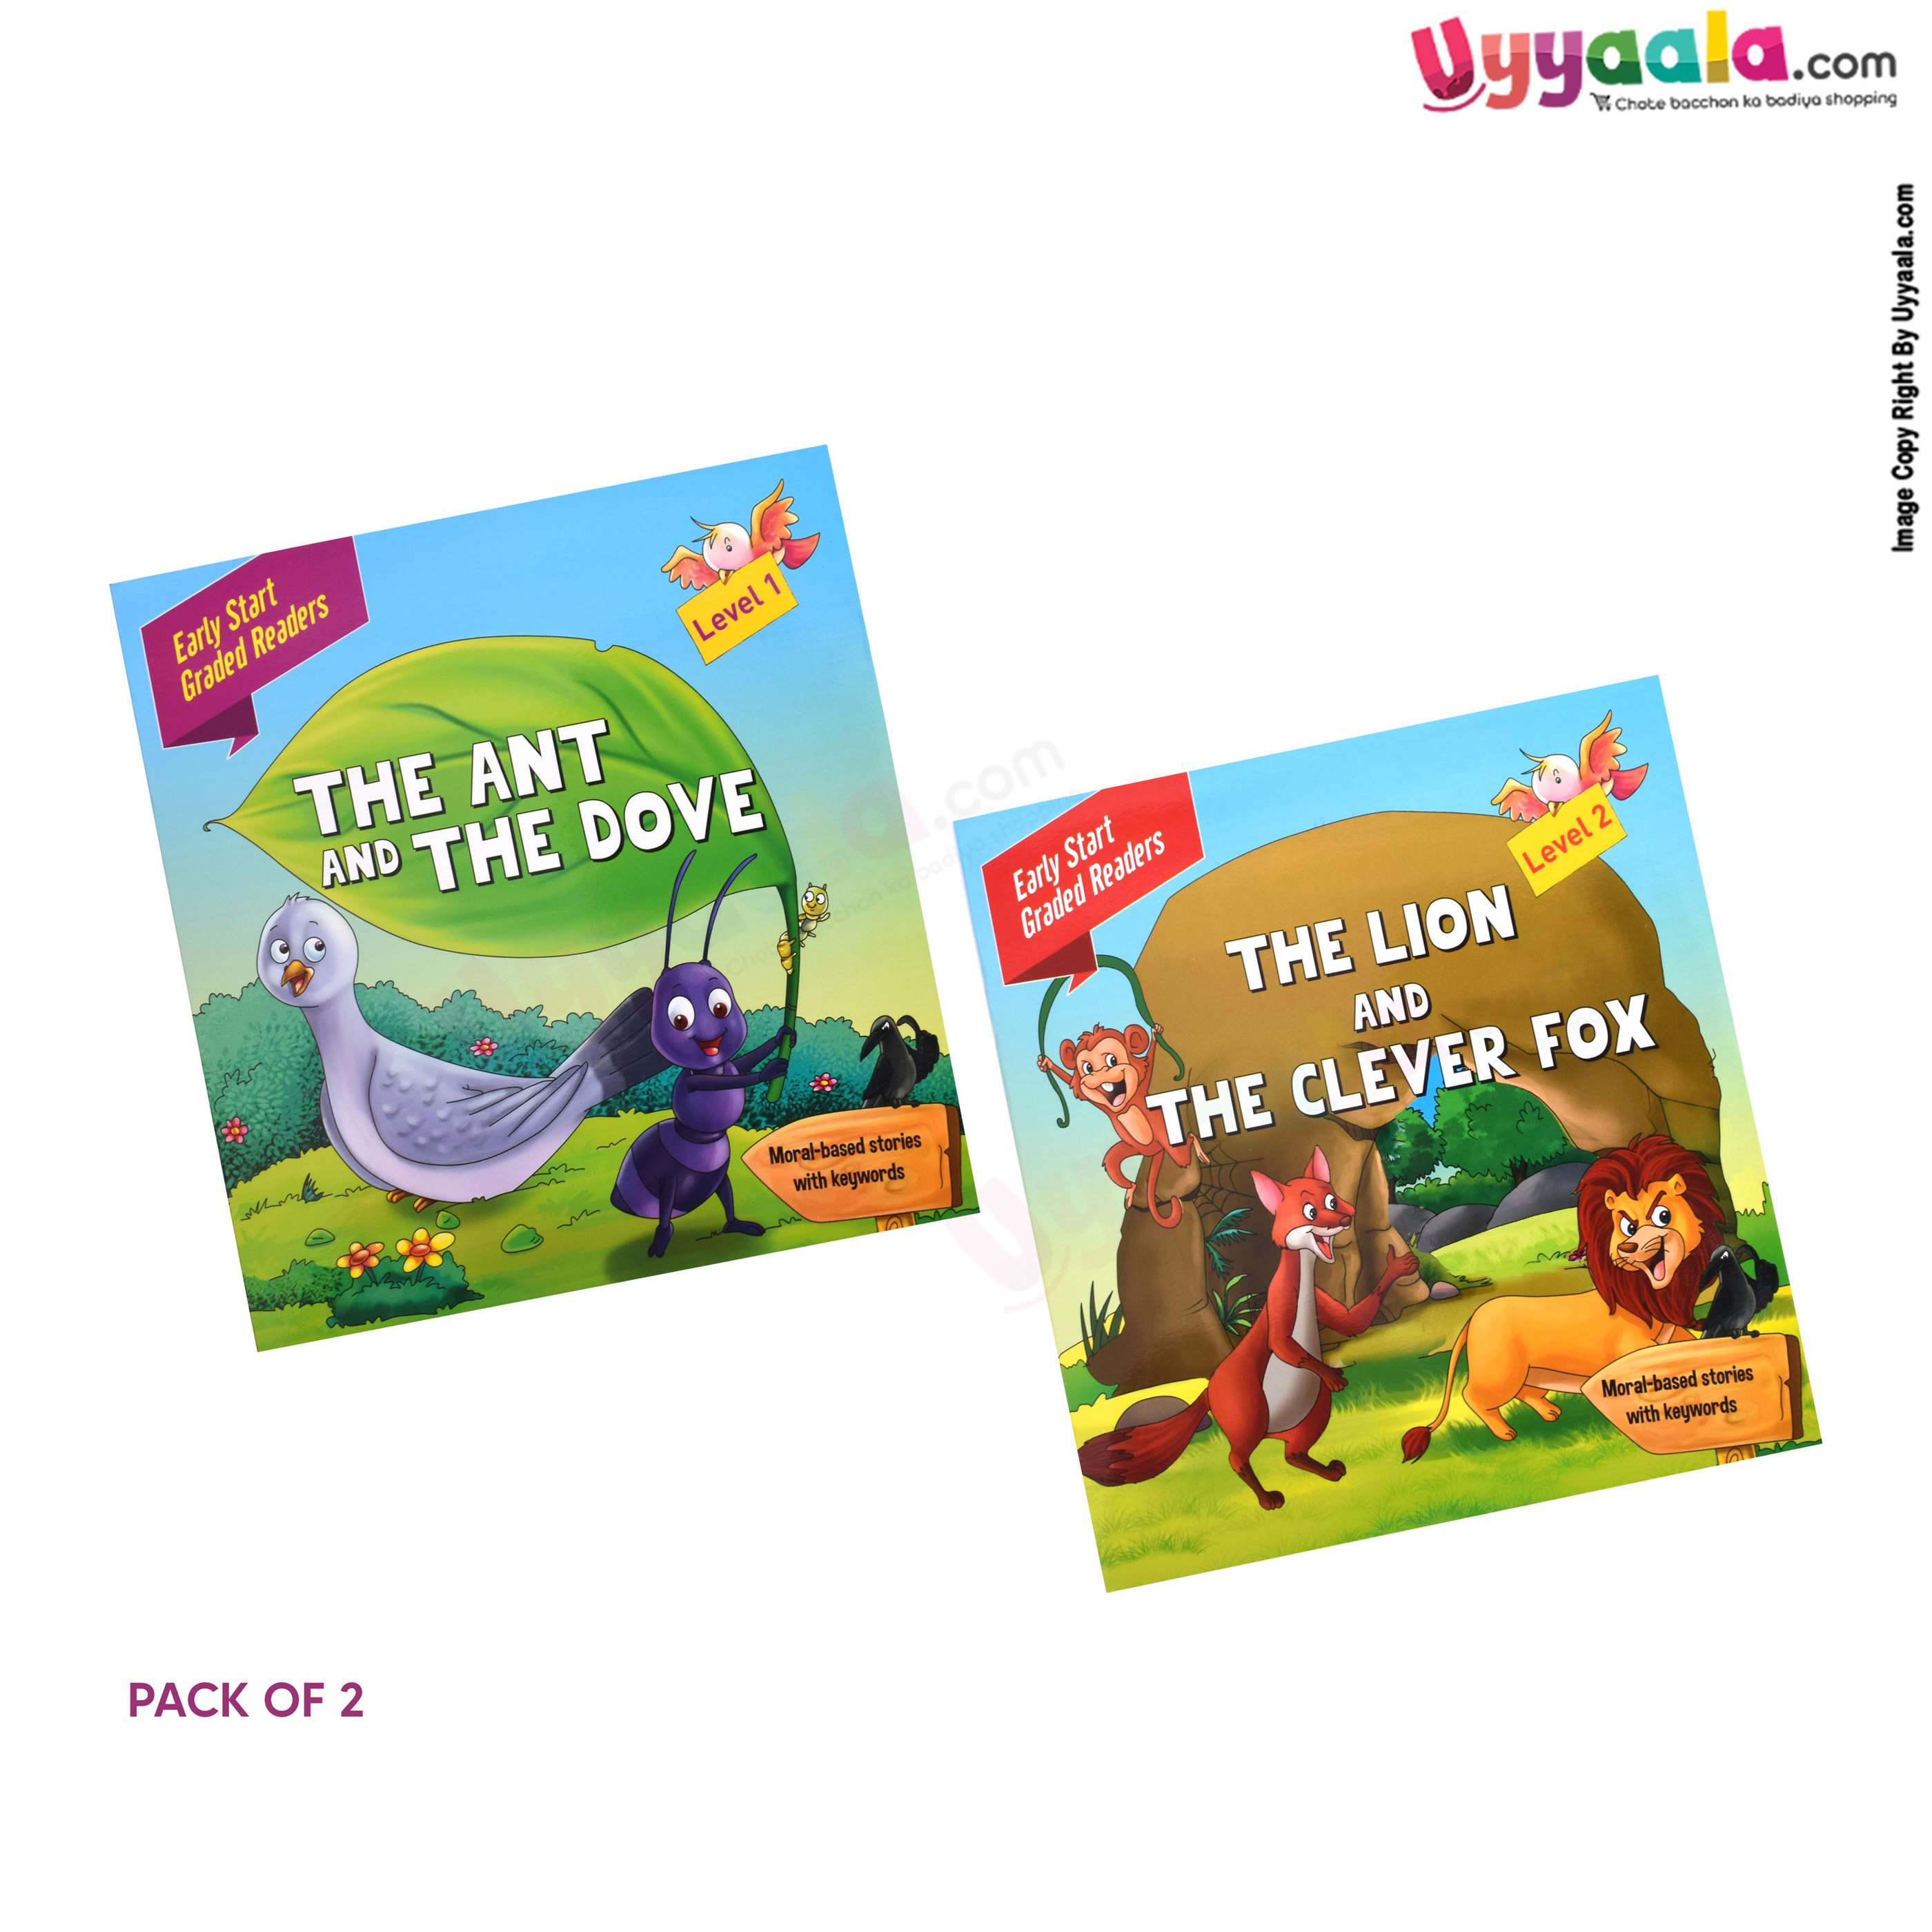 Early start graded readers - the ant and the dove & the lion and the clever fox - pack of 2 - 2 volumes (2 - 5 years)